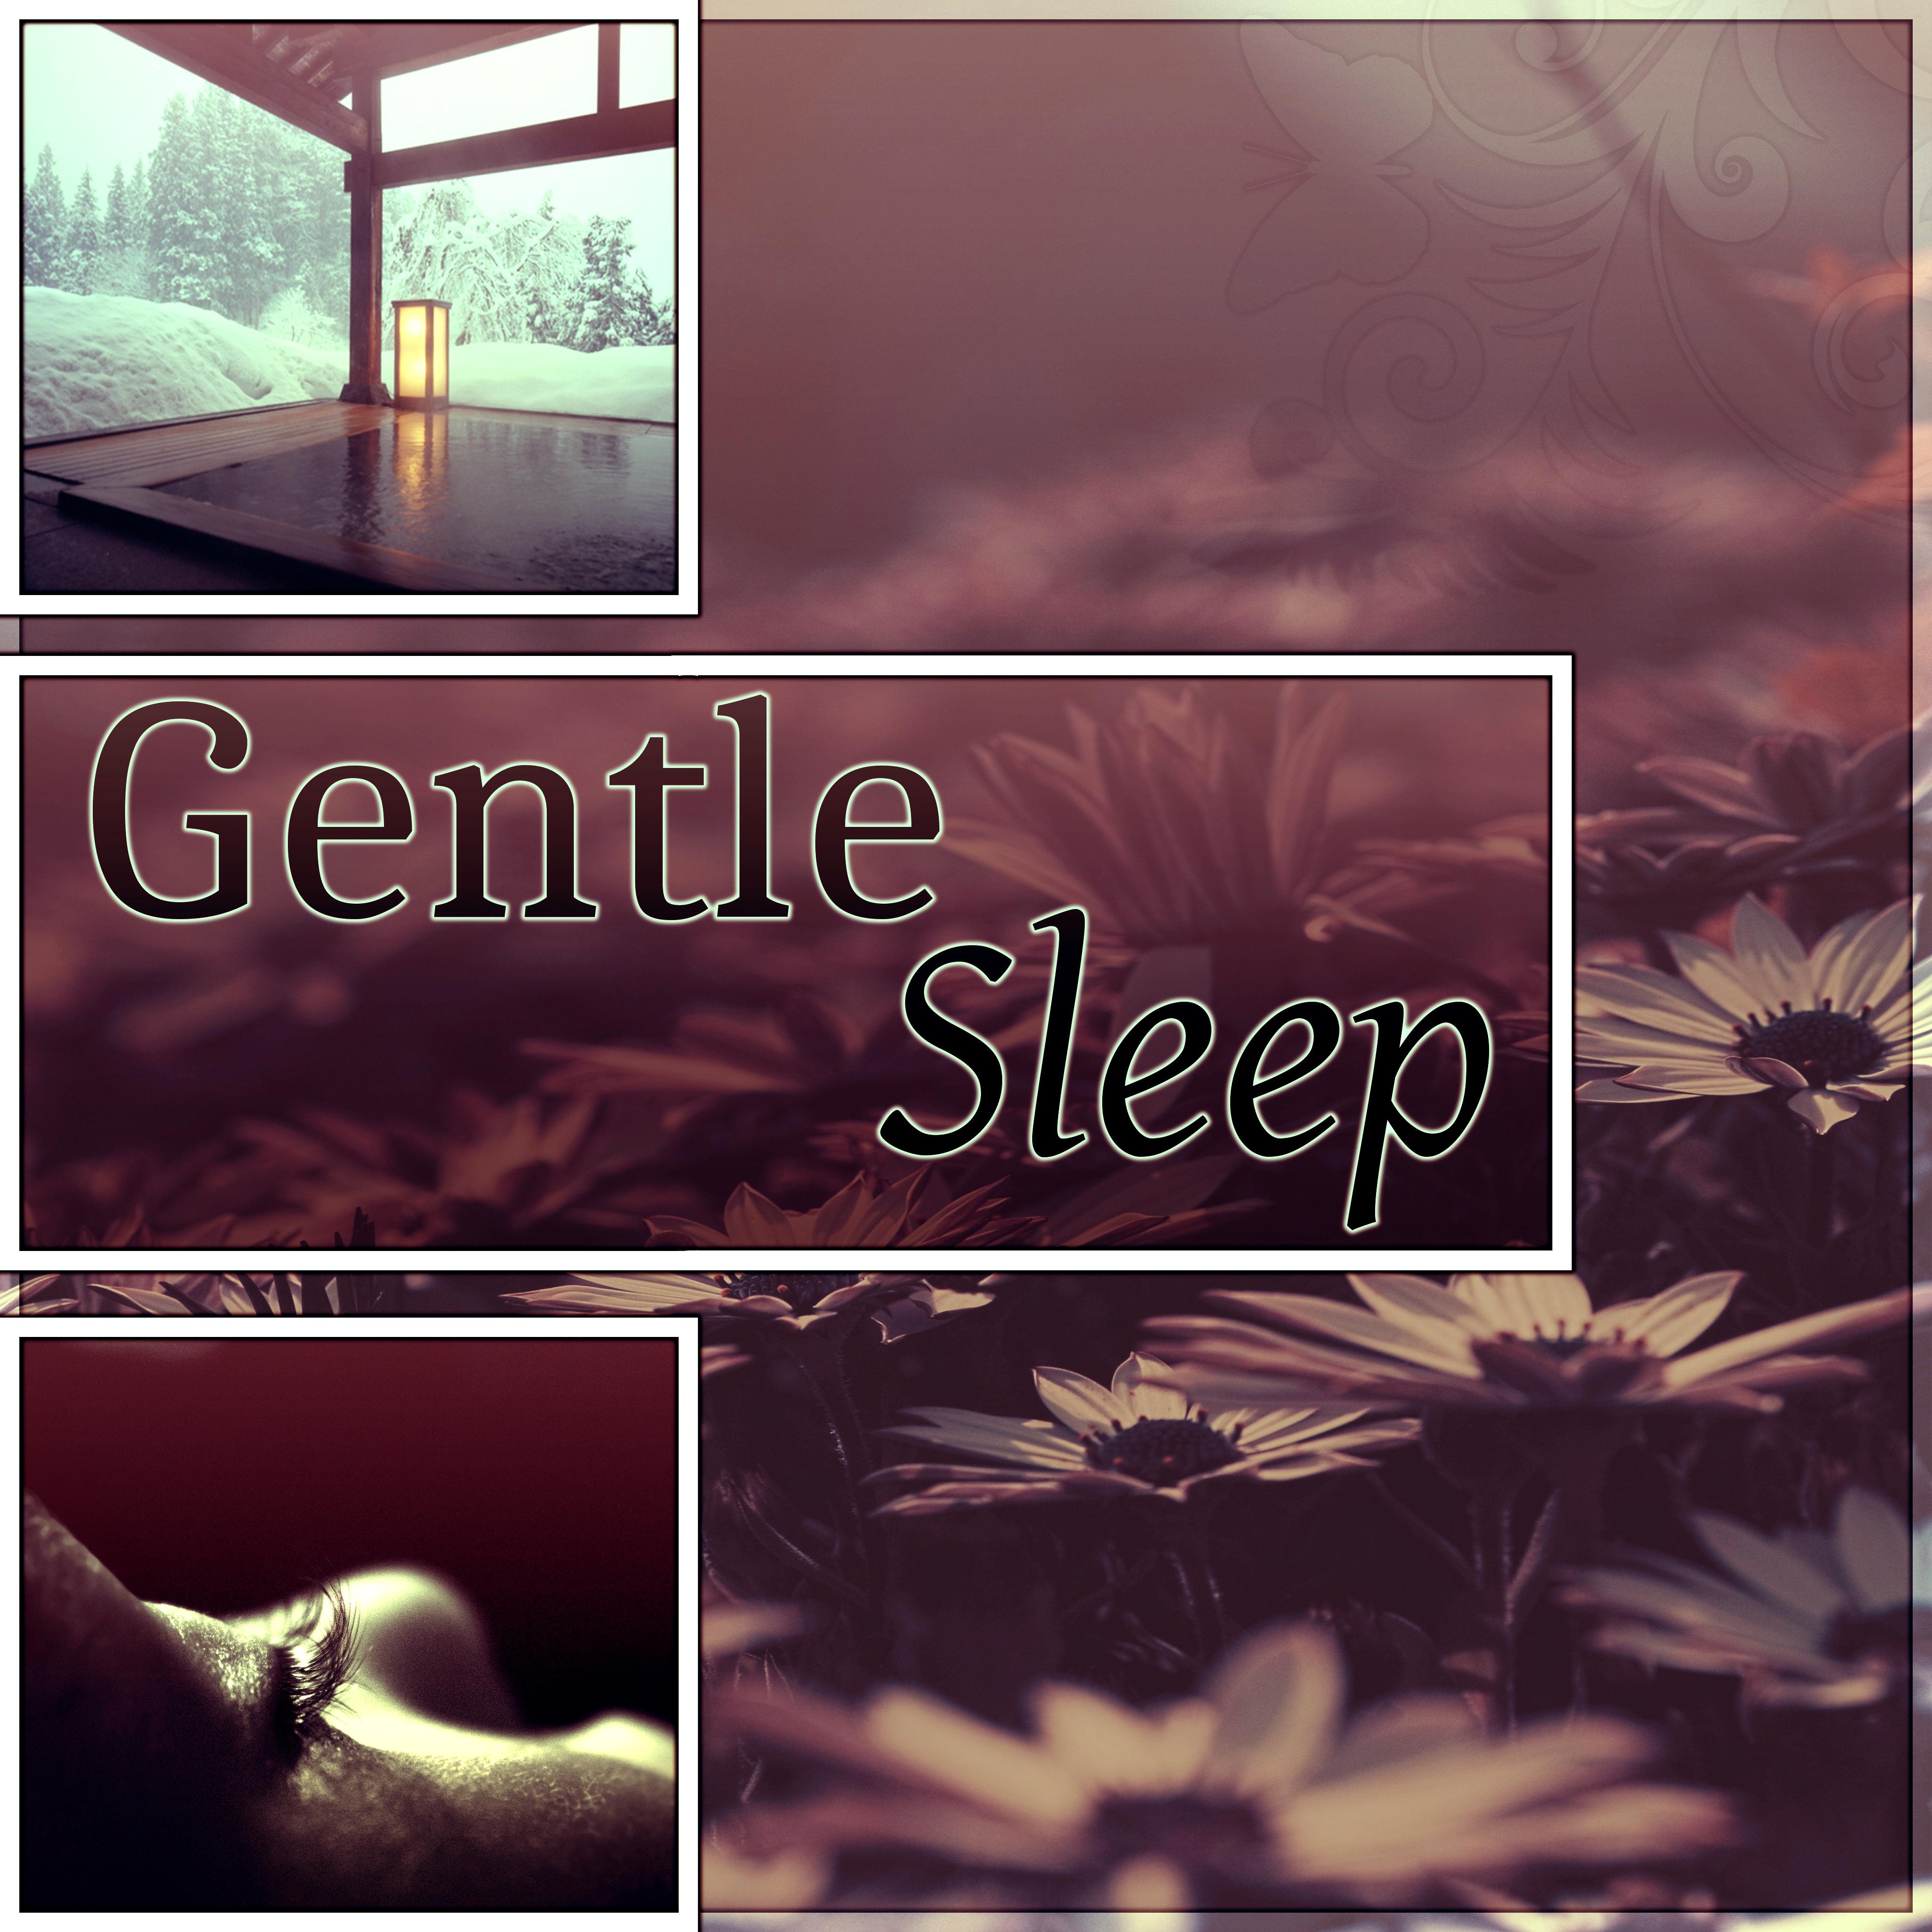 Gentle Sleep - Sounds of Nature for Deep Sleep, Good Night, White Noise Music for Sleep Disorders, Insomnia Cures, Relaxation Music